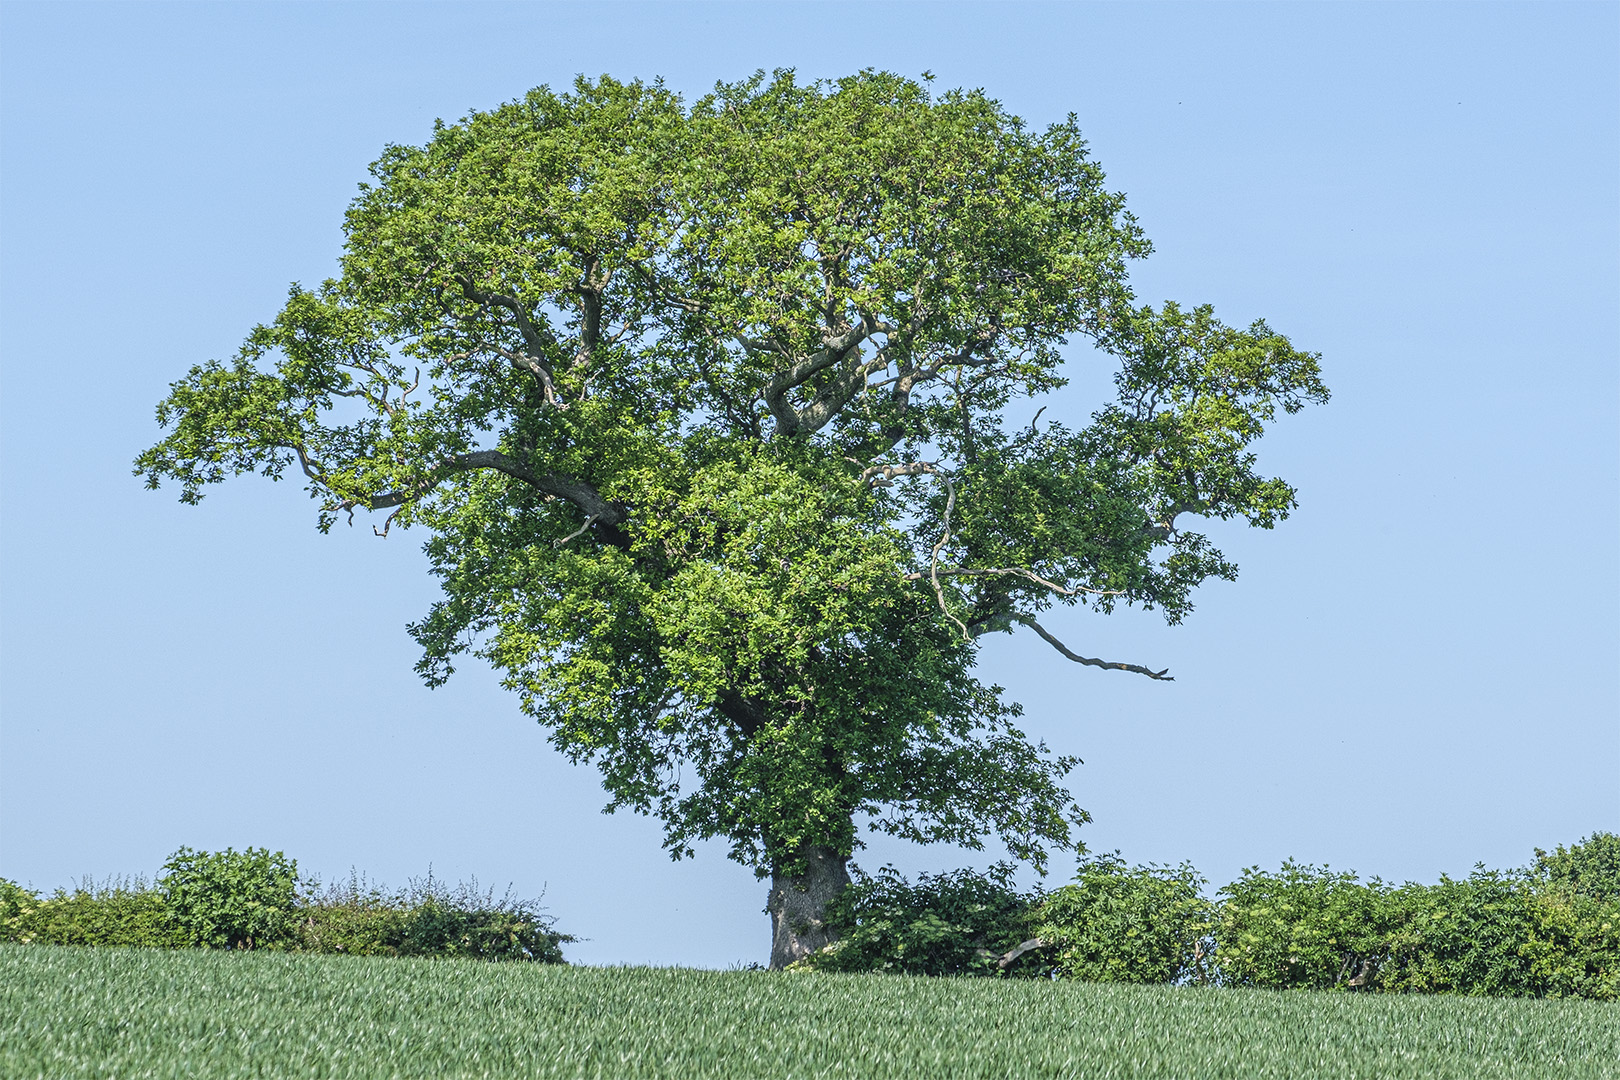 The tree in summer